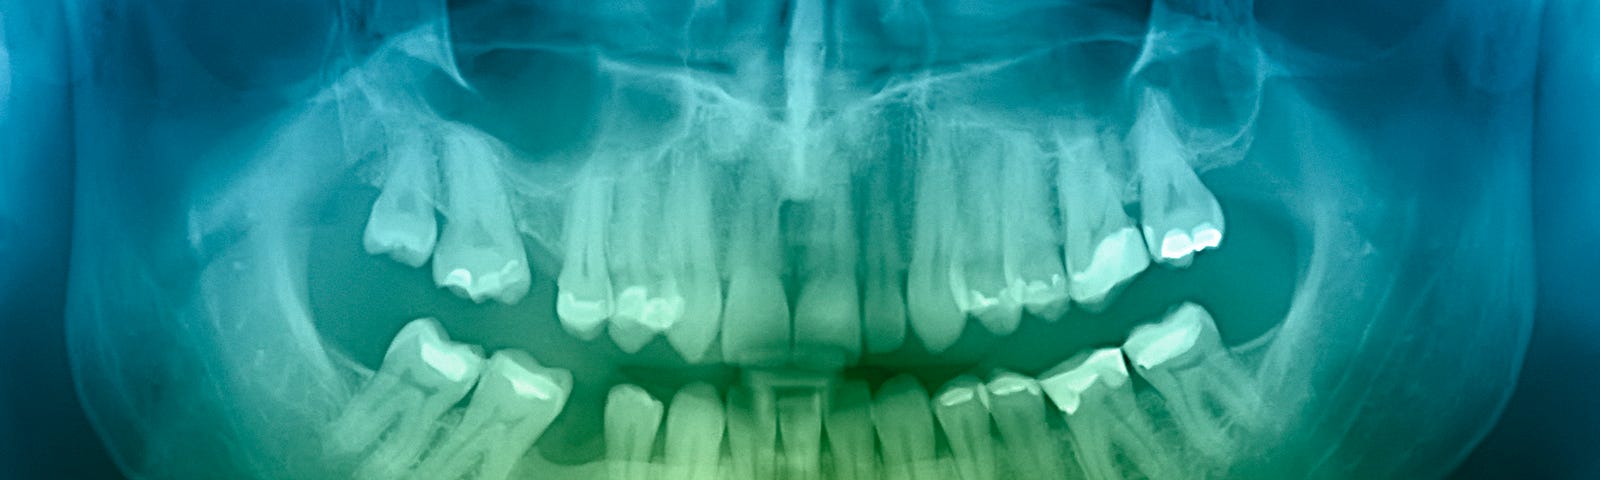 An X-ray of a patient’s mouth/teeth/jaw. It appears to be smiling.